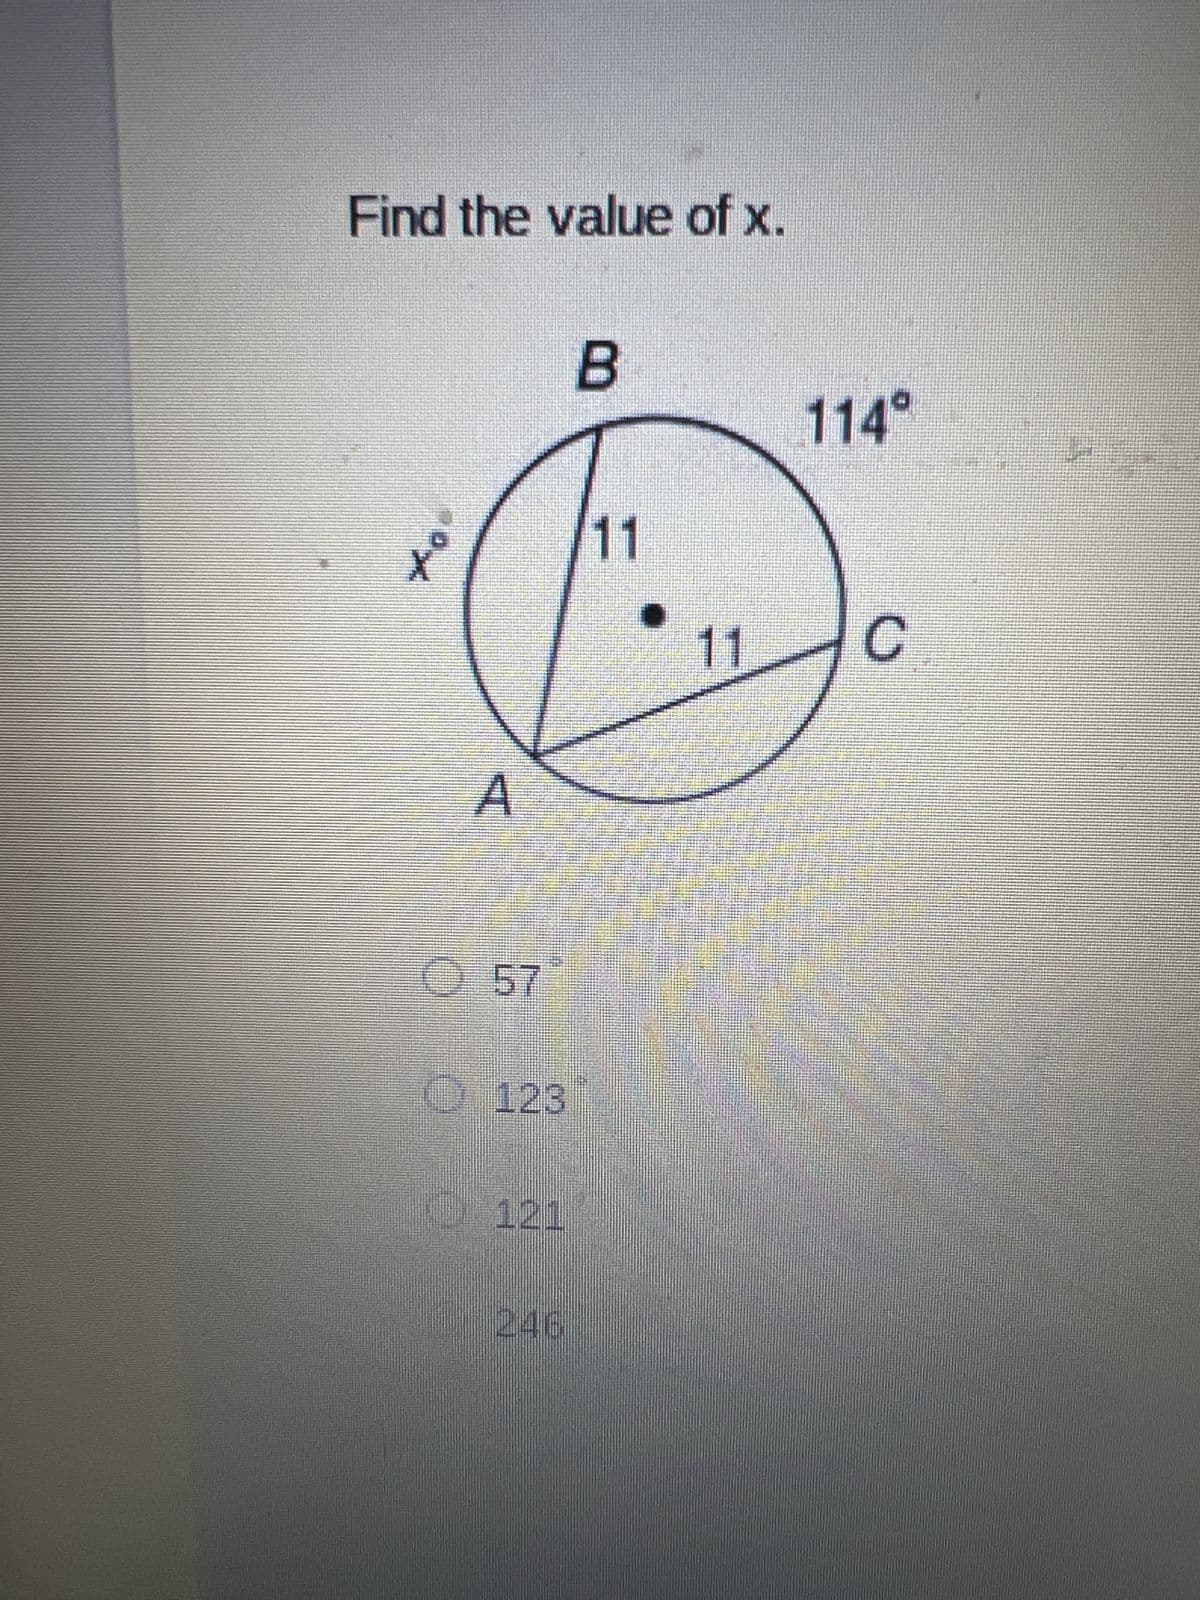 Find the value of x.
B
nigh
A
0 57
123
121
240
11
11
114°
C